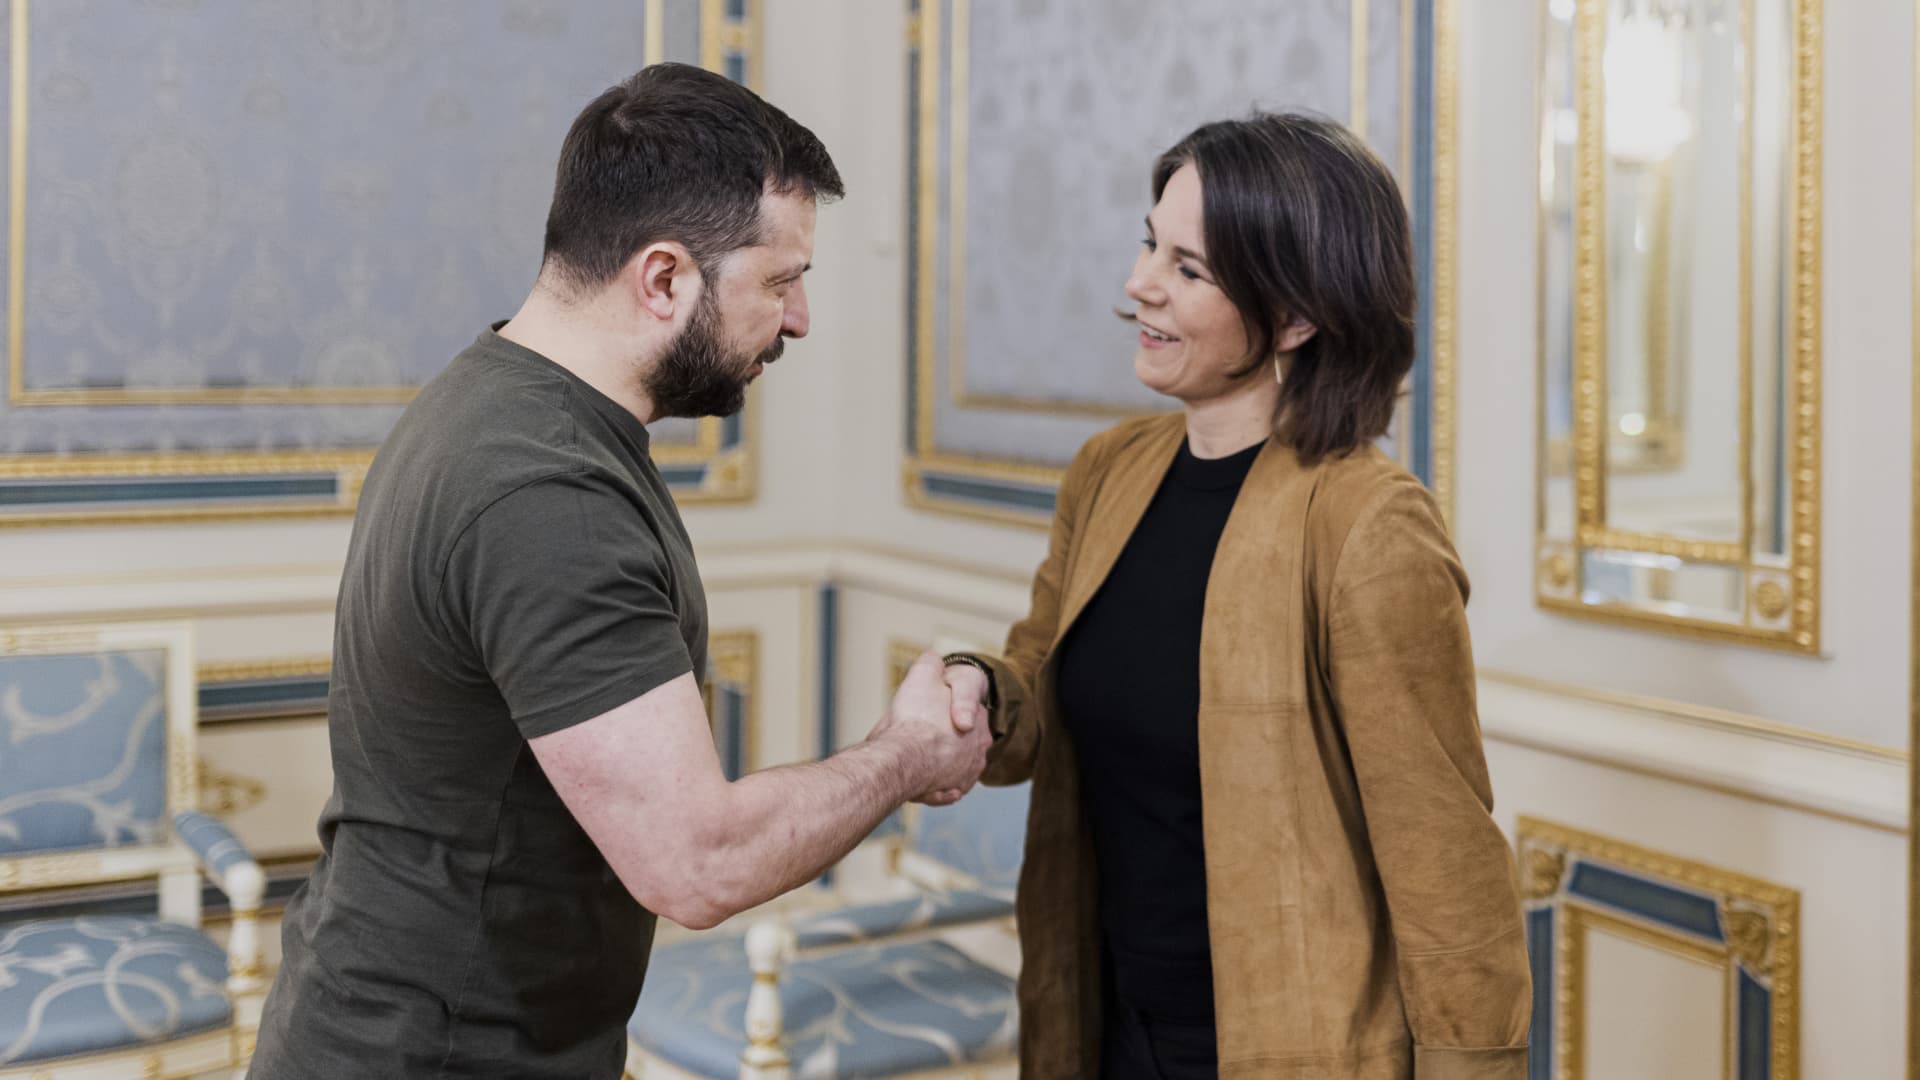 German Foreign Minister Annalena Baerbock meets with Ukrainian President Volodymyr Zelenskyy in Kyiv on May 10th. 2022.